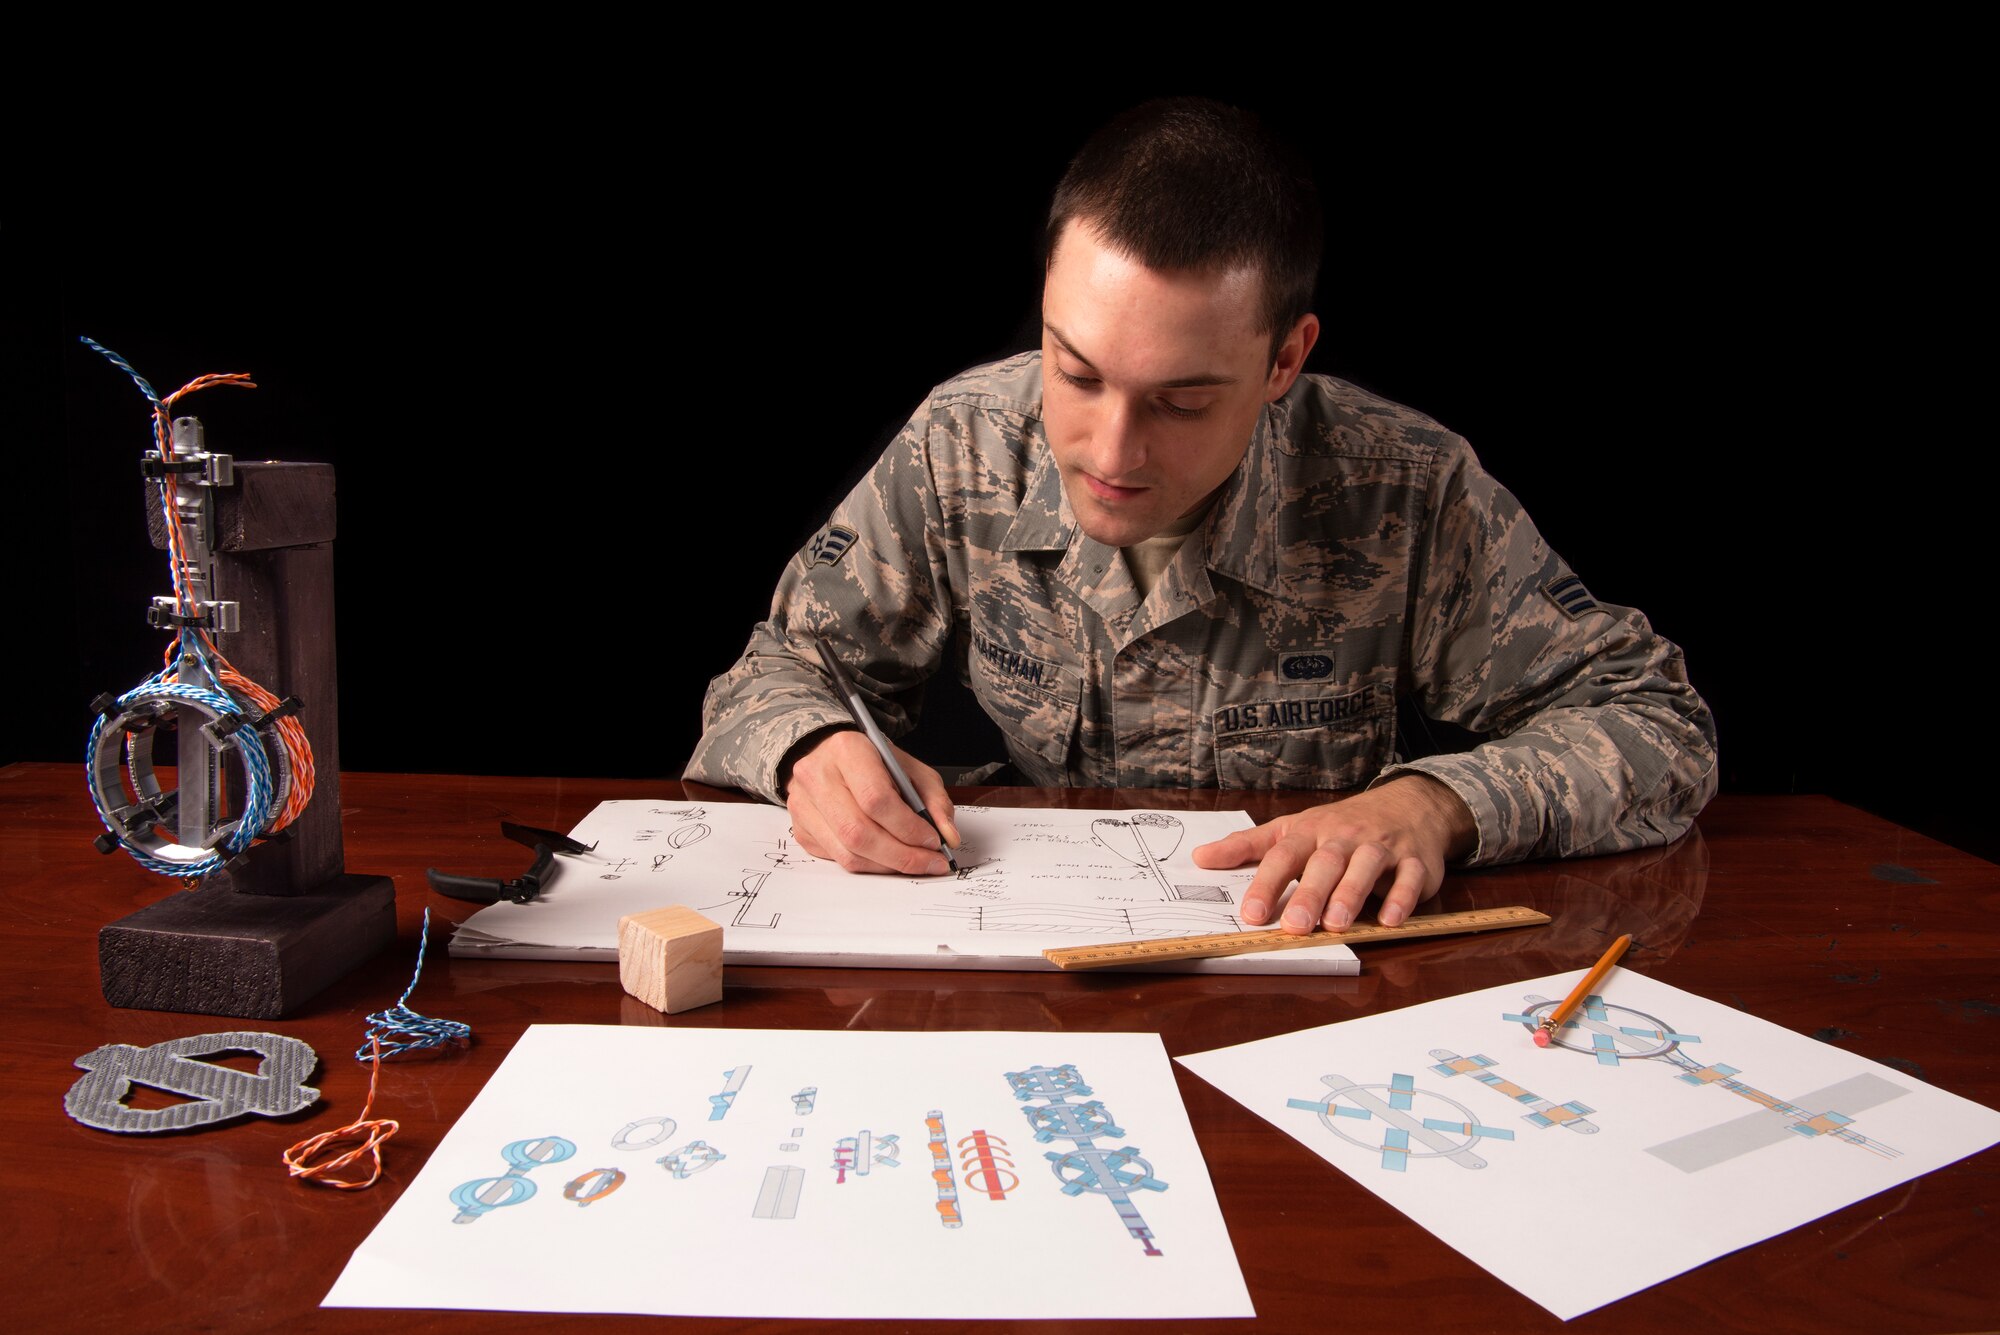 Senior Airman Hartman, 726th Air Command Squadron cyber transport technician, sketches an idea for his invention of a cable management system, Sept. 16, 2020, at Mountain Home Air Force Base, Idaho. Hartman was selected to compete at the Air Combat Command level through the Spark Tank Challenge, which creates an avenue for Airmen to present their ideas to senior leadership. (U.S. Air Force photo by Senior Airman Andrew Kobialka)